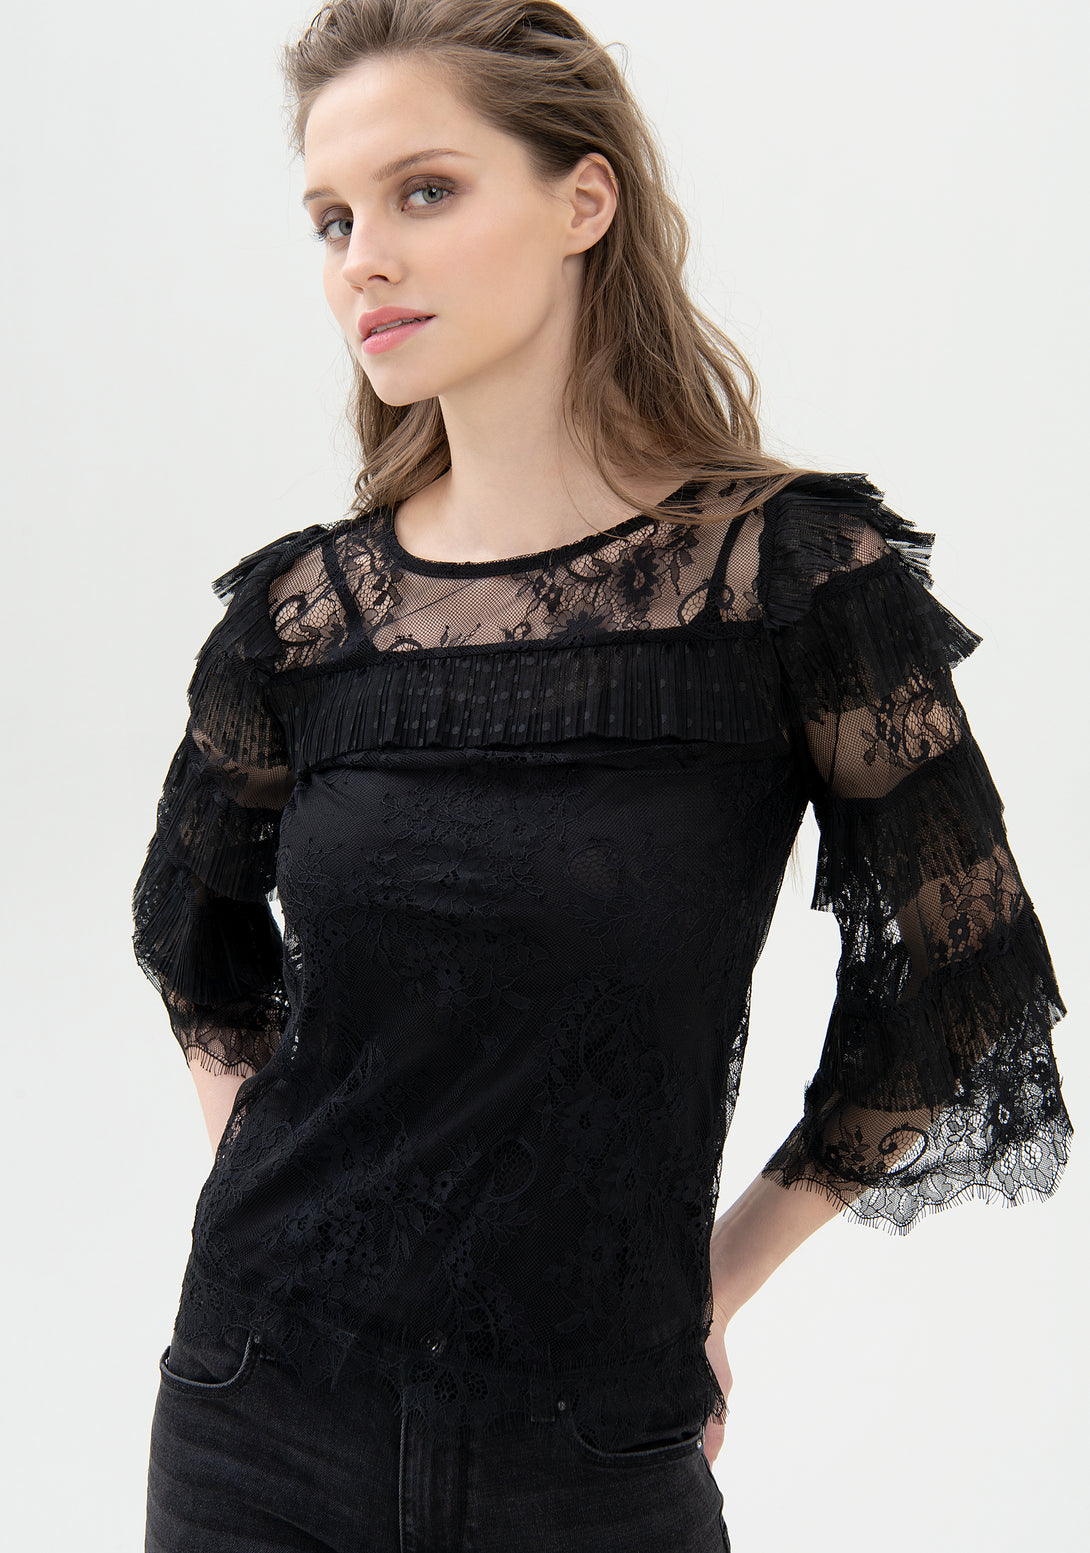 Blouse regular fit made in hand-woven lace